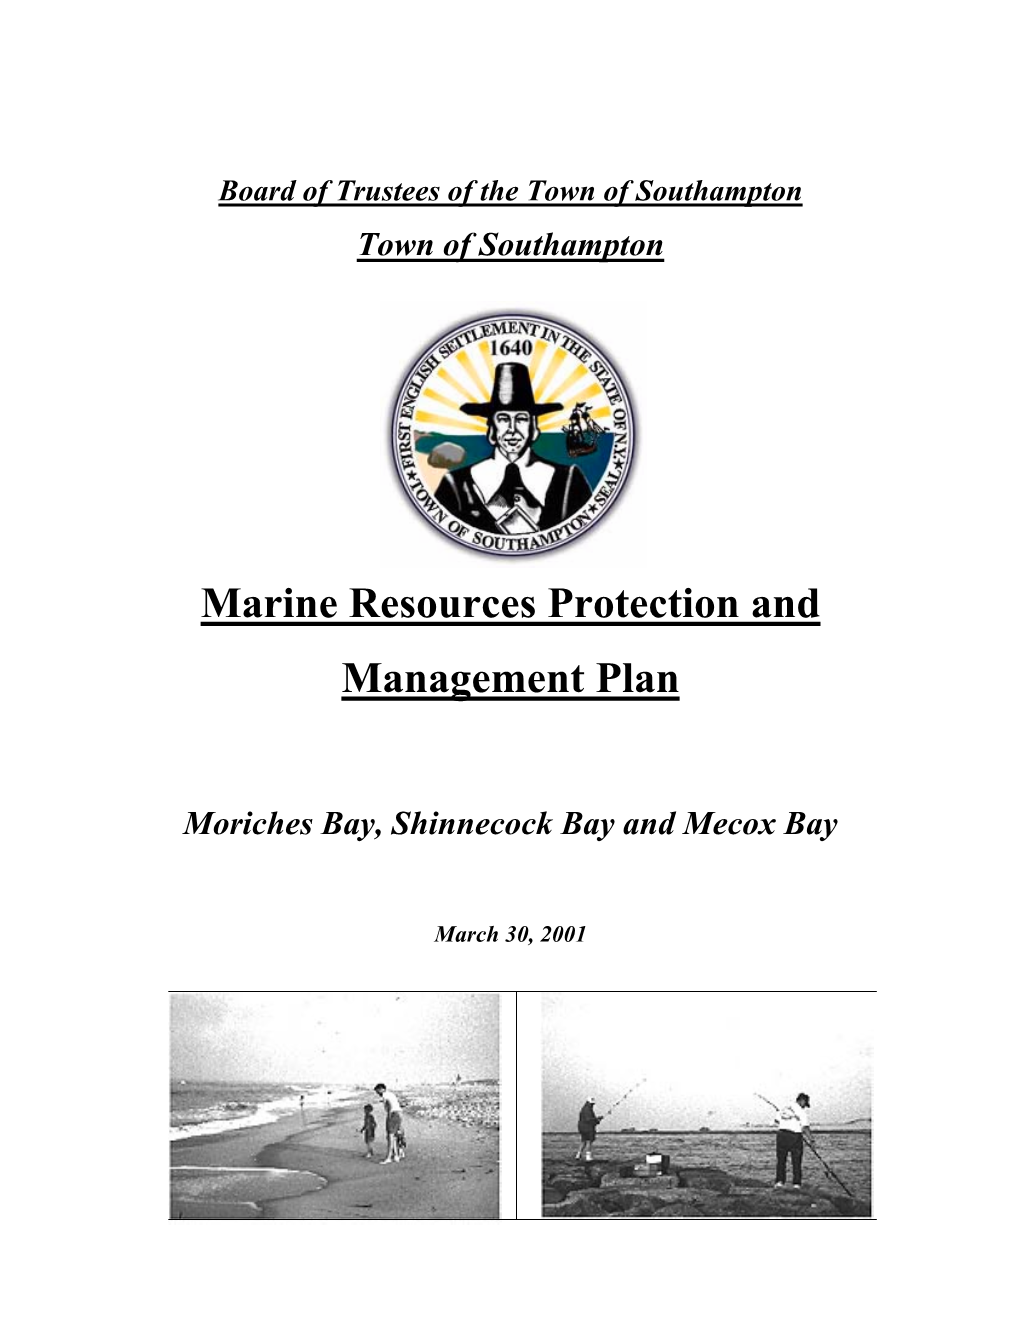 Marine Resources Protection and Management Plan